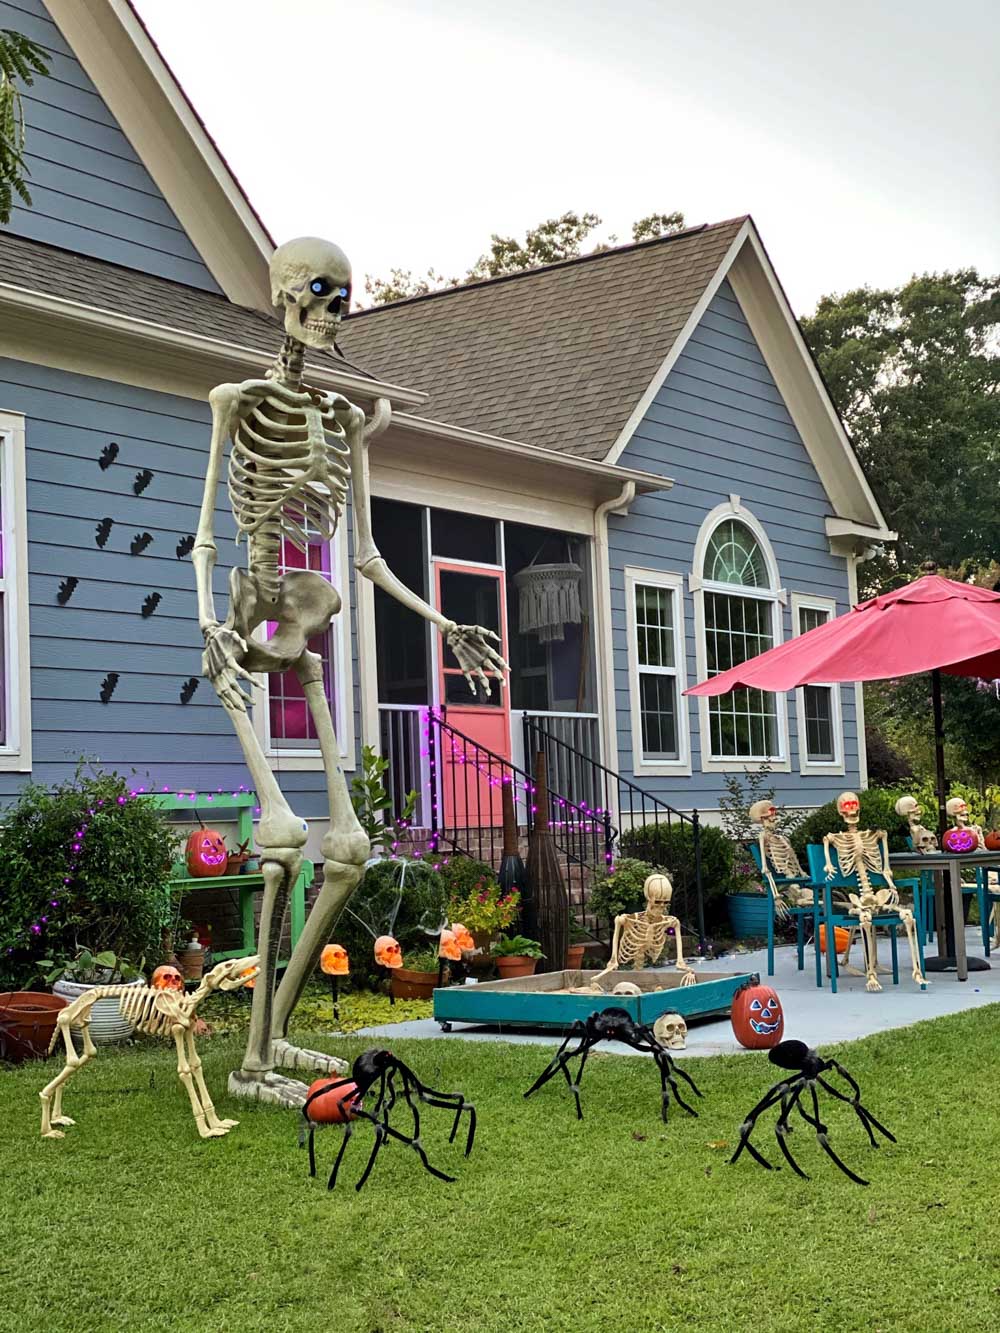 A front yard decorated for Halloween with skeletons, spiders, purple lights, and a giant skeleton.